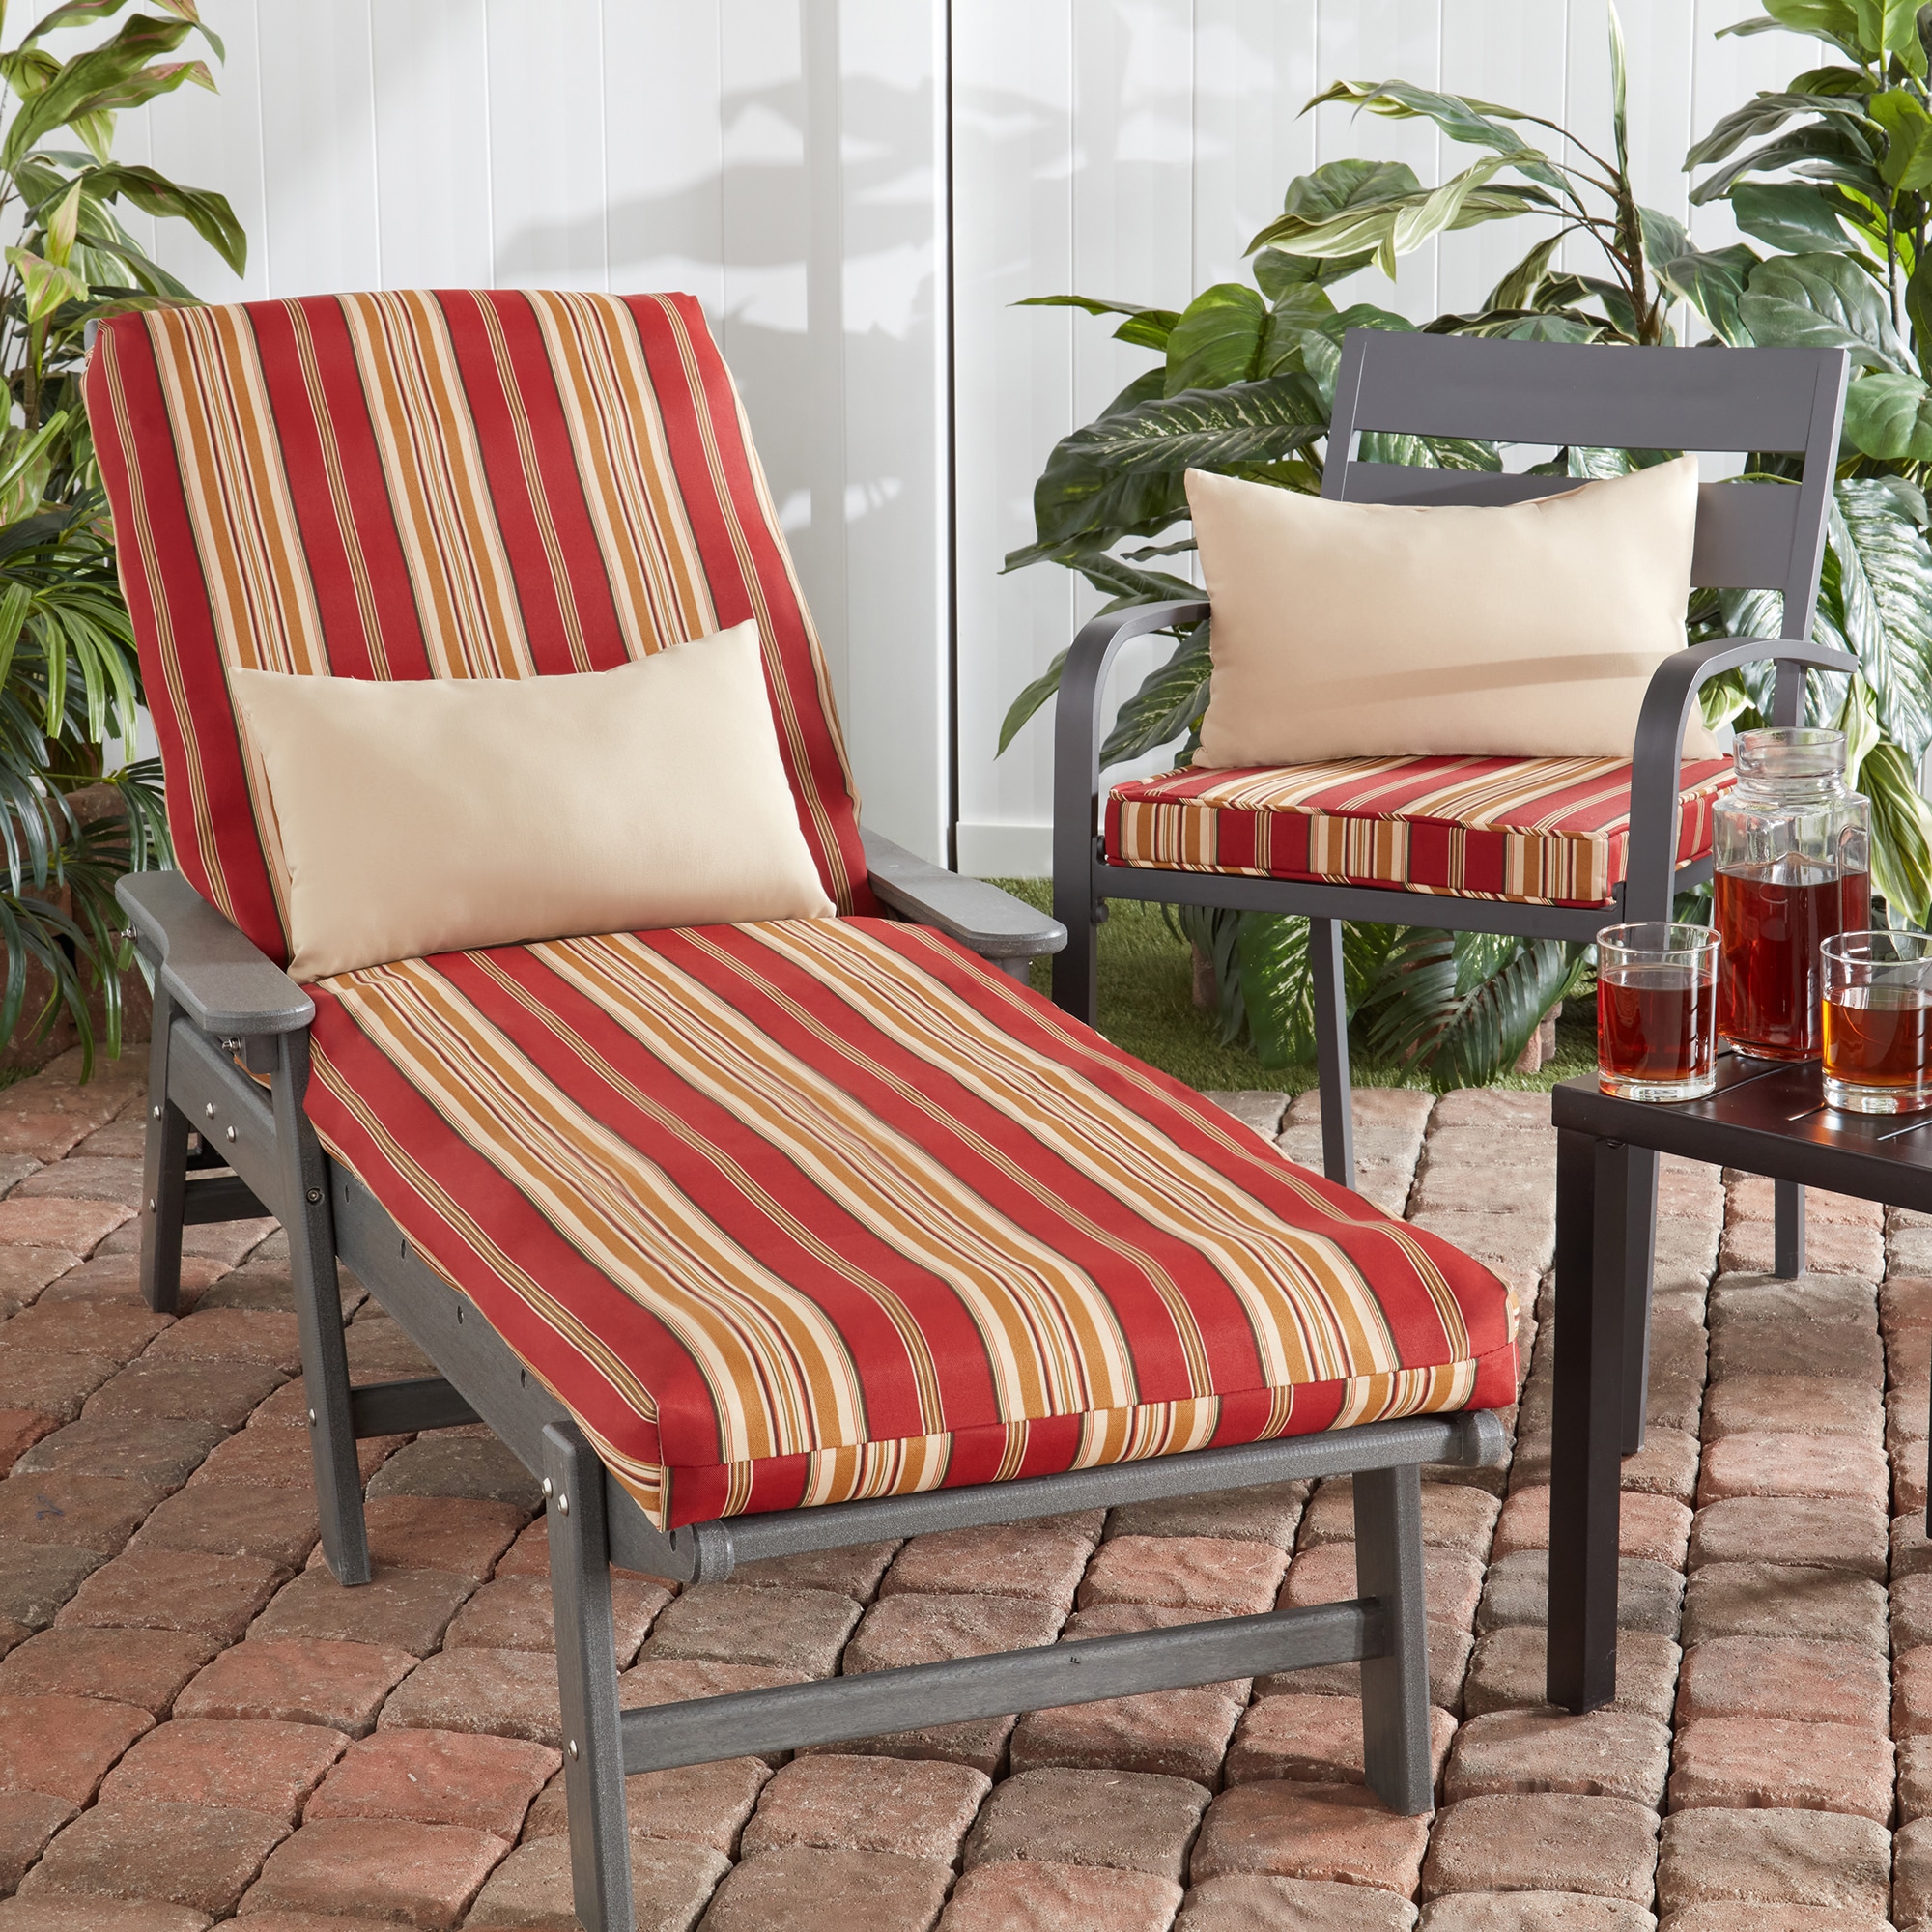 Reviews for Greendale Home Fashions Cayman Stripe 20 in. x 20 in